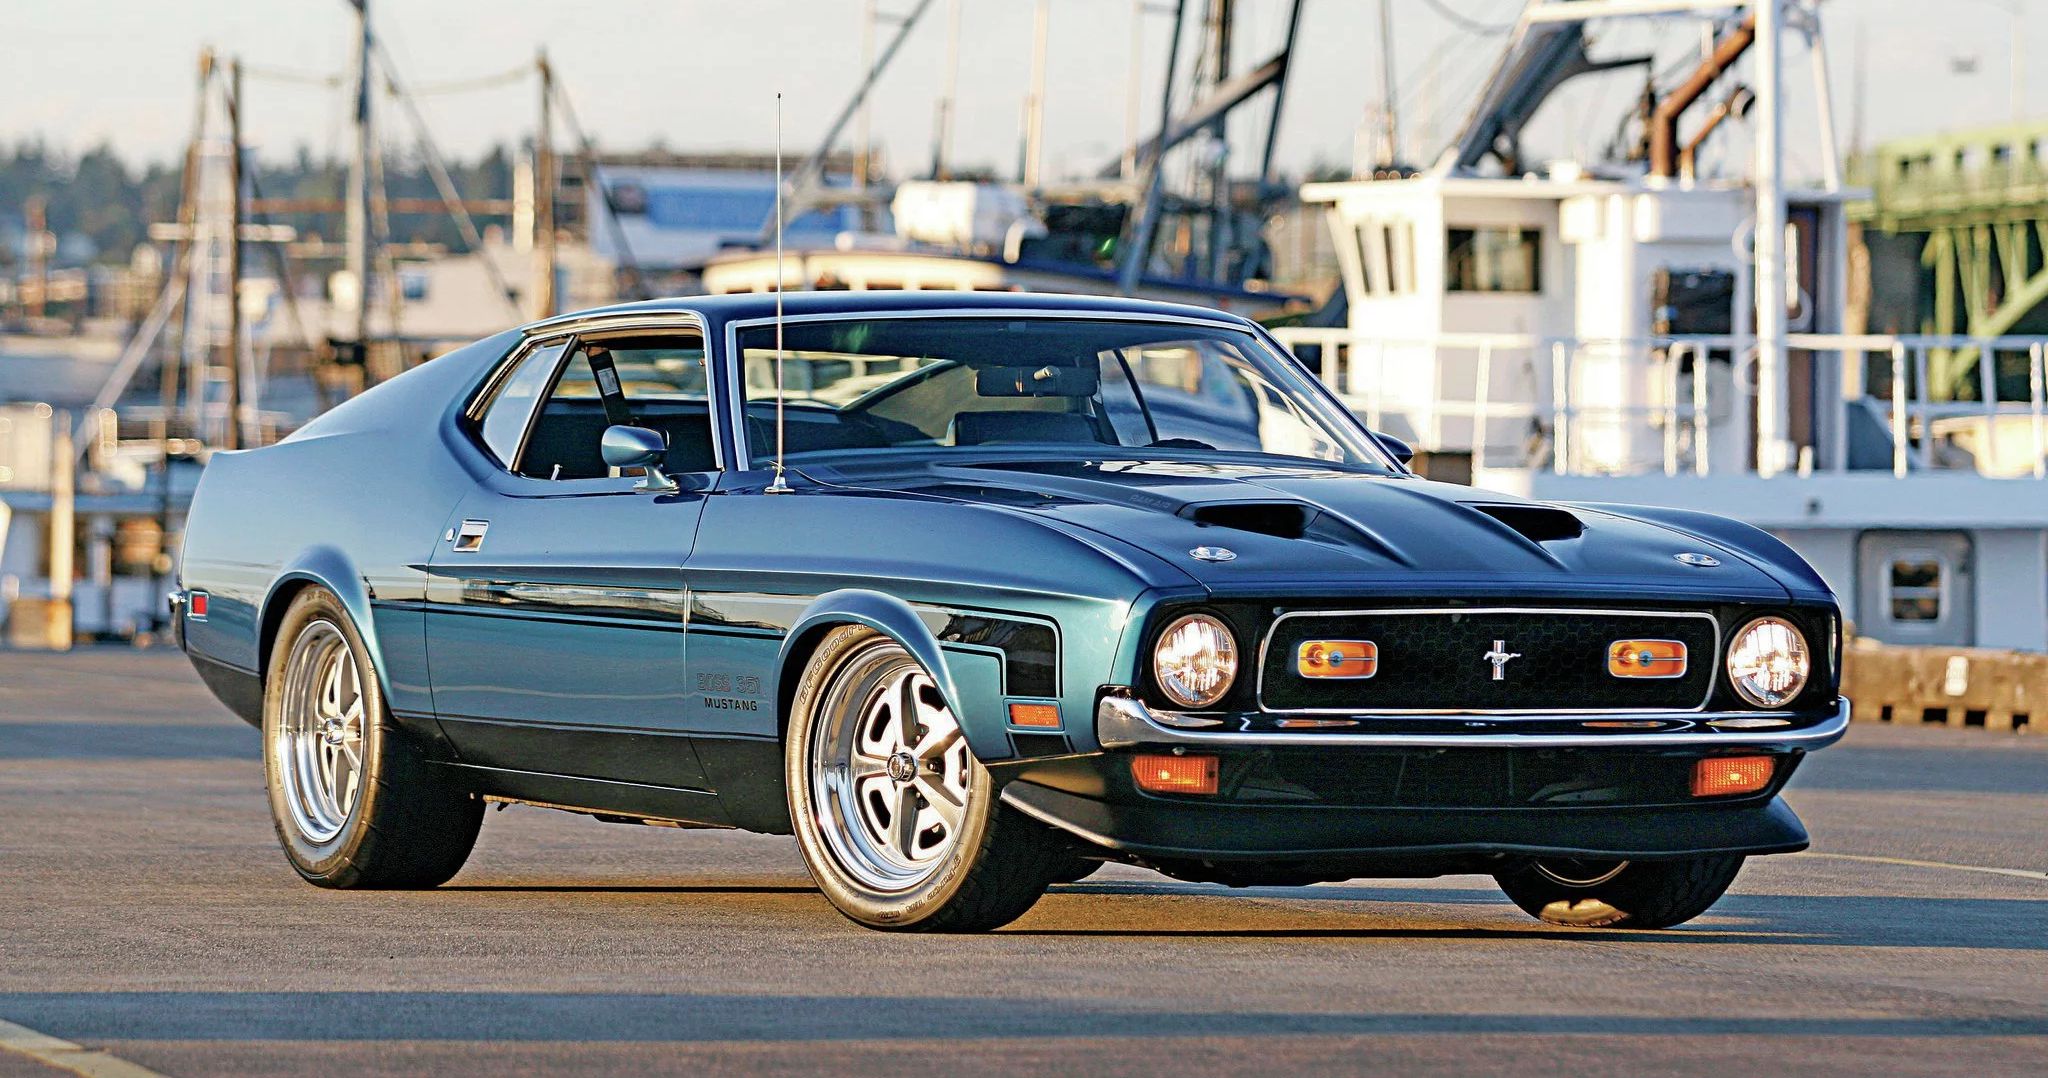 10 Causes The 1971 Ford Mustang Boss 351 Was One Of The Greatest Muscle Automobiles Of Its Time